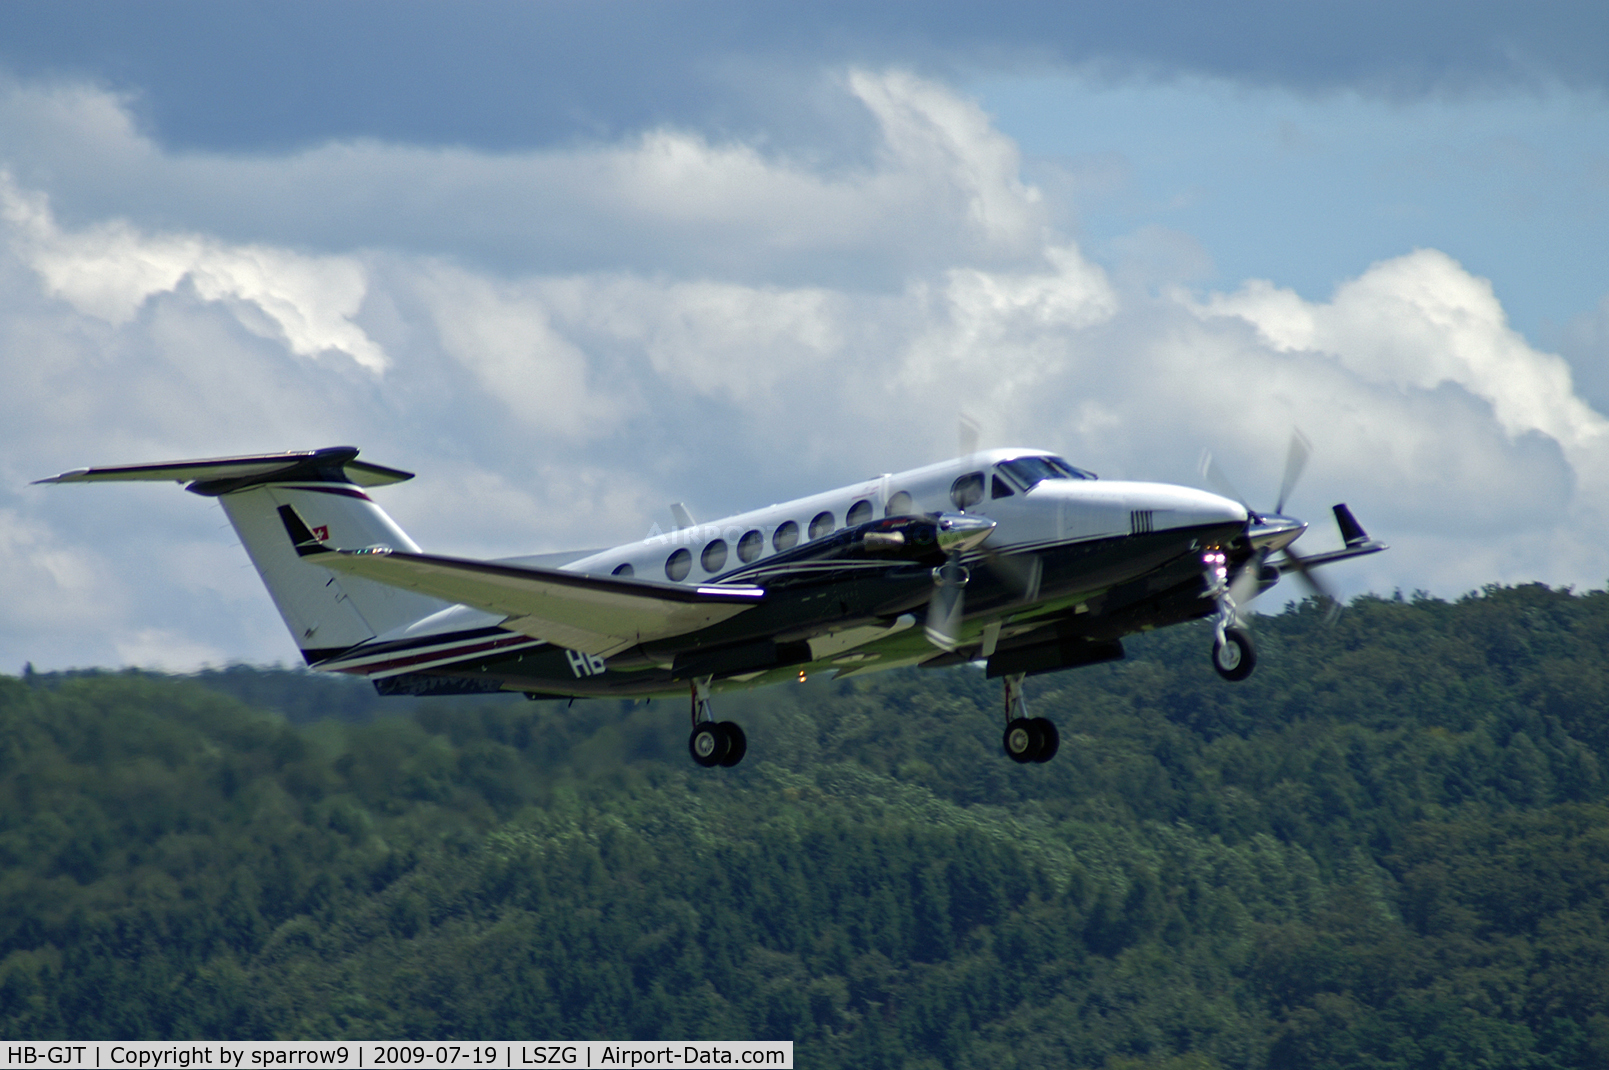 HB-GJT, 2007 Hawker Beechcraft 350 King Air (B300) C/N FL-535, Departing Grenchen rwy 25, now 24. HB-registered from 2007-06-22 until 2012-07-30.